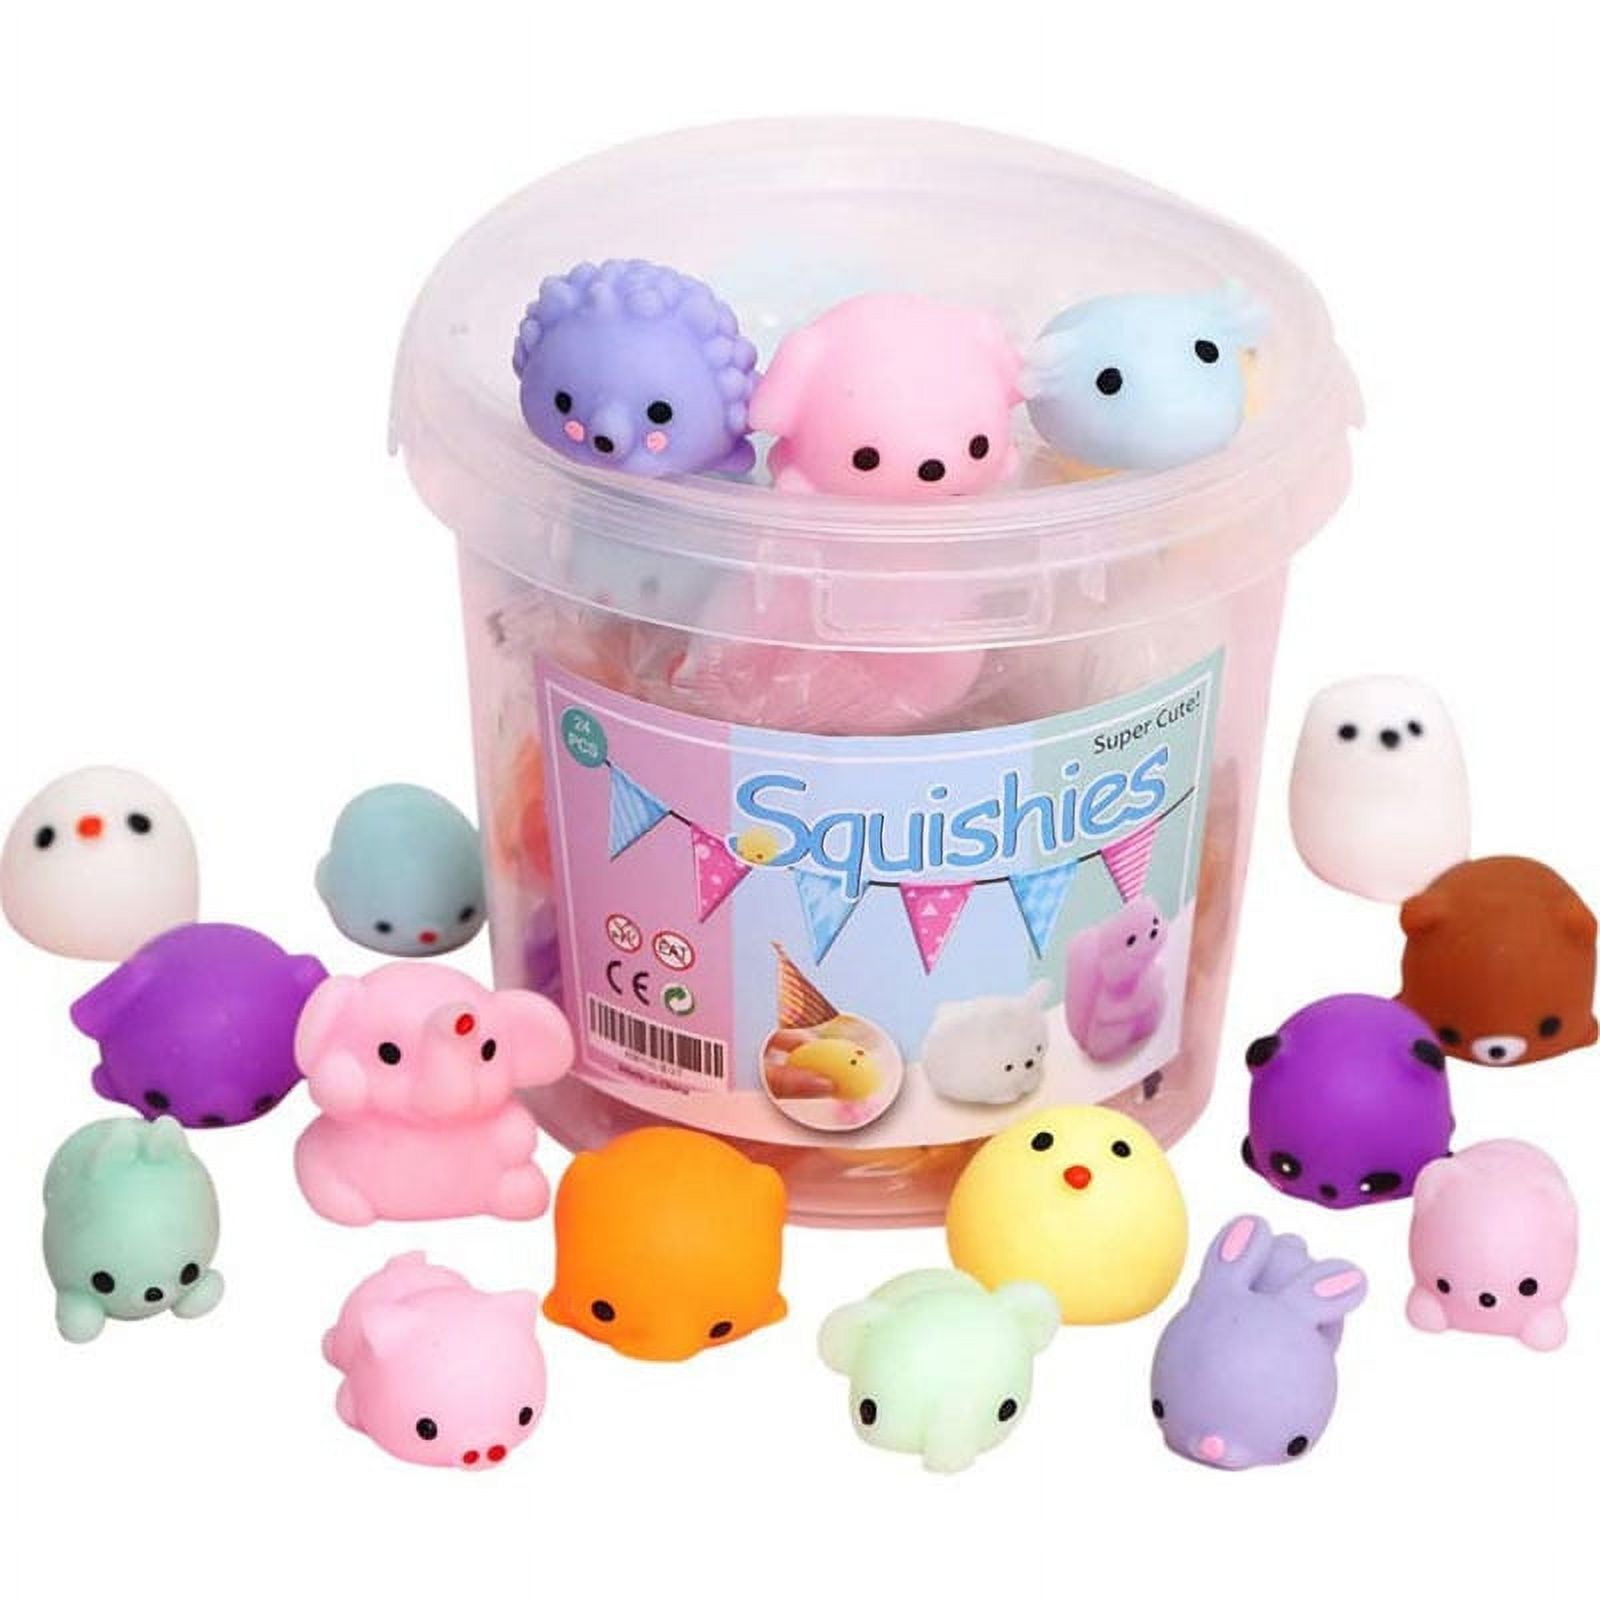 MMTX Squishy Toy 4pcs, Kawaii Soft Squishy Toy, Galaxy Squishies Slow  Rising Animal Squishy Toys, Anti Stress Fidget Compressive Toy Squeeze for  Kids and Adults 